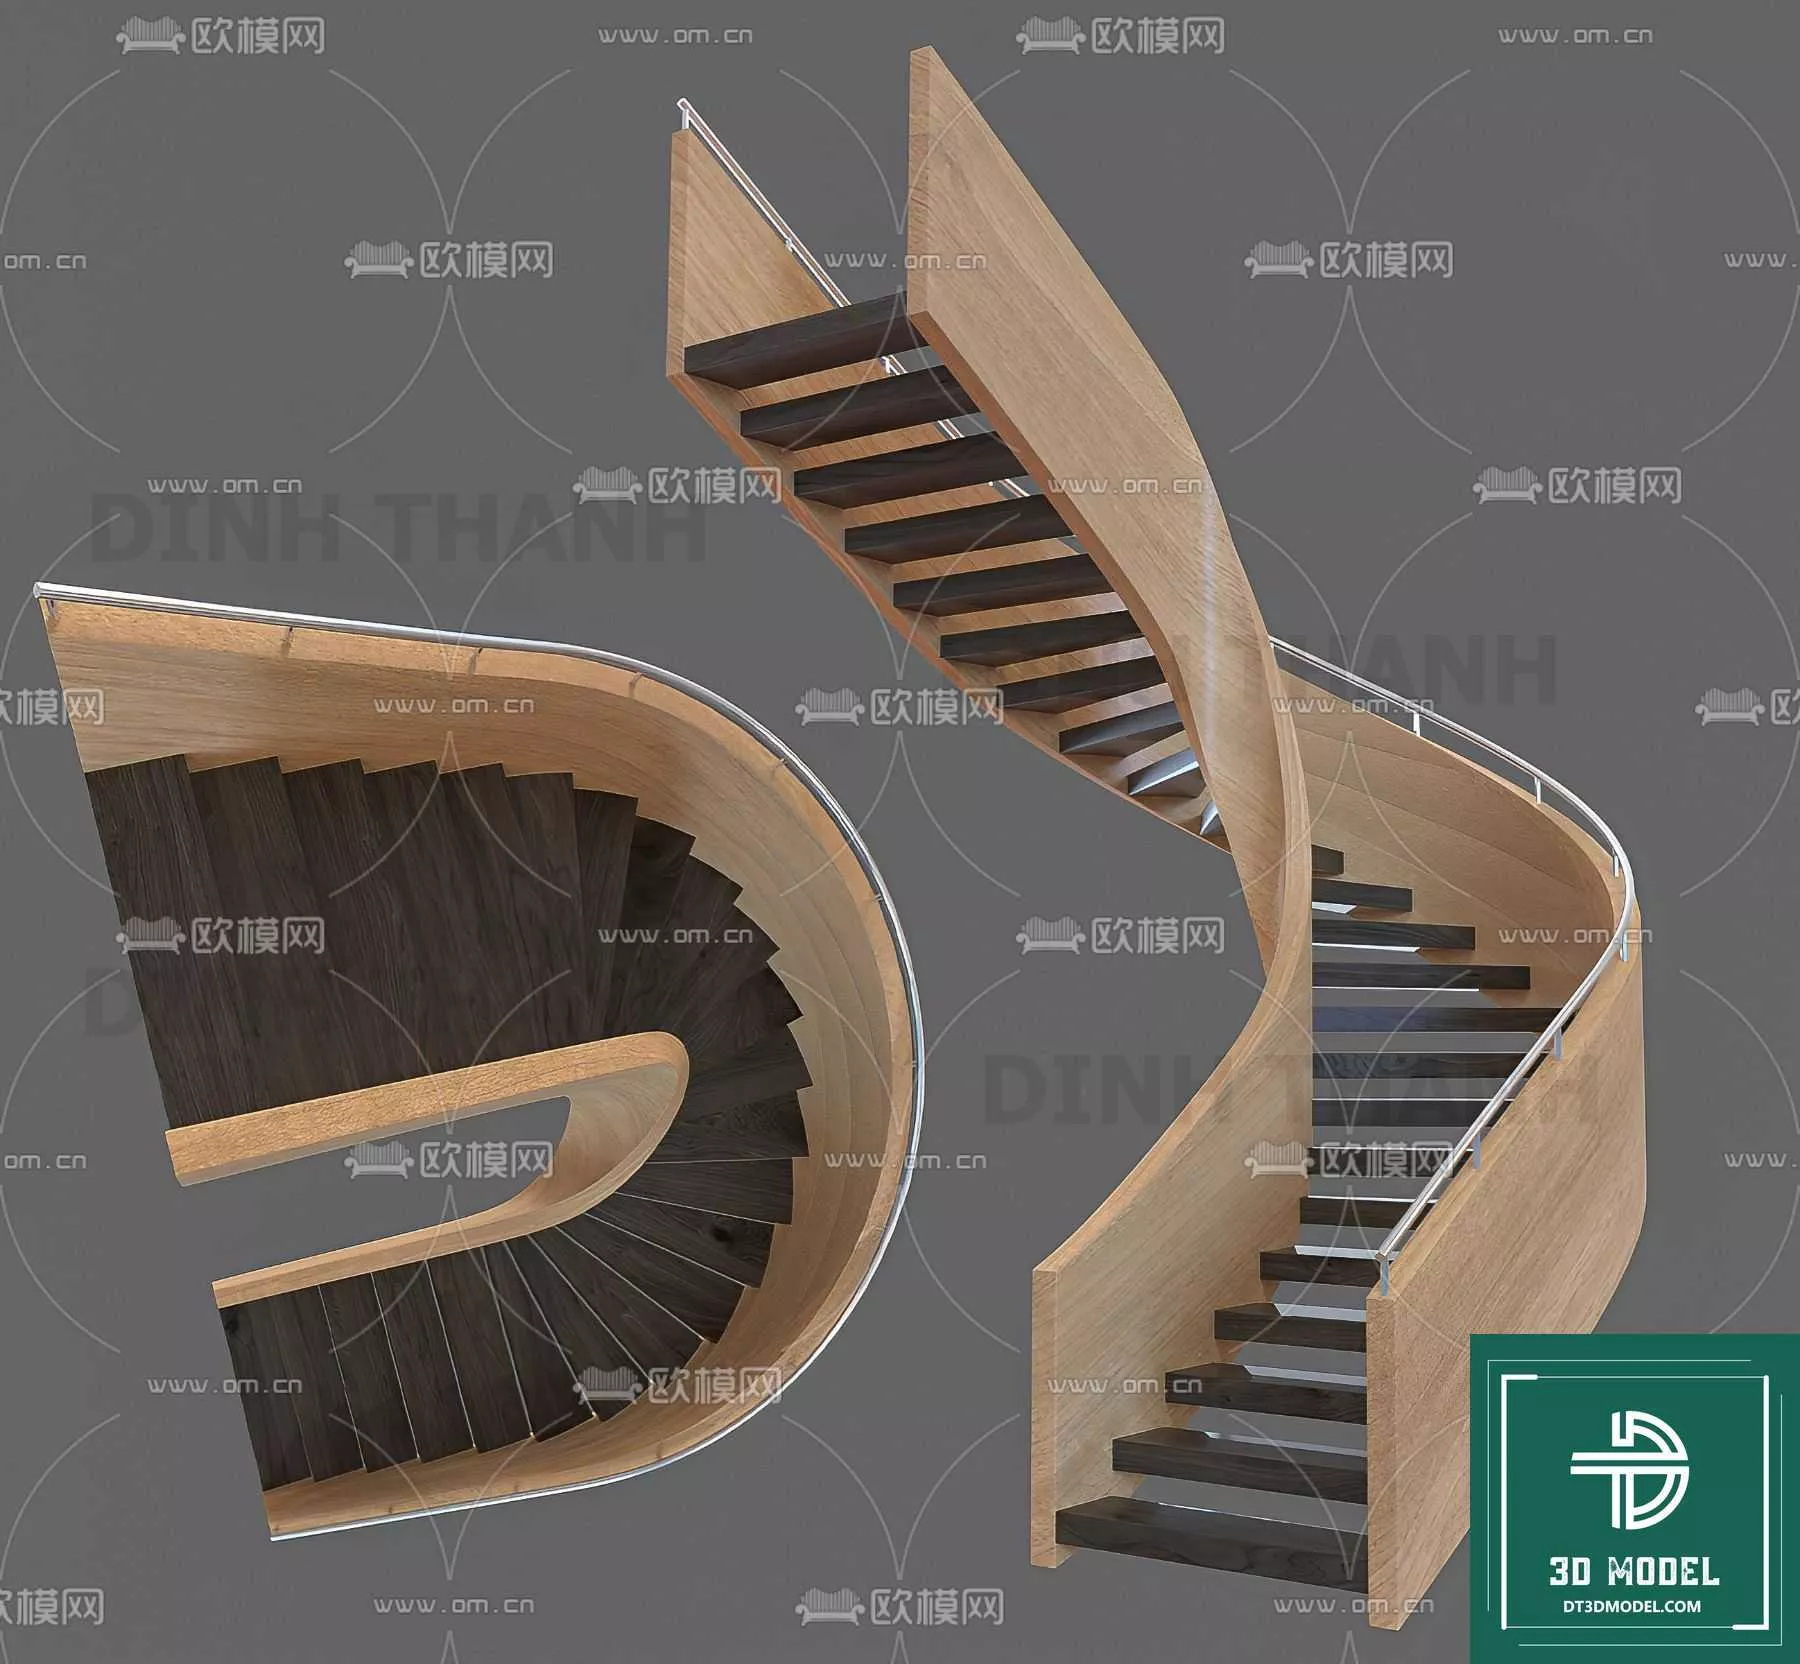 MODERN STAIR - SKETCHUP 3D MODEL - VRAY OR ENSCAPE - ID14302